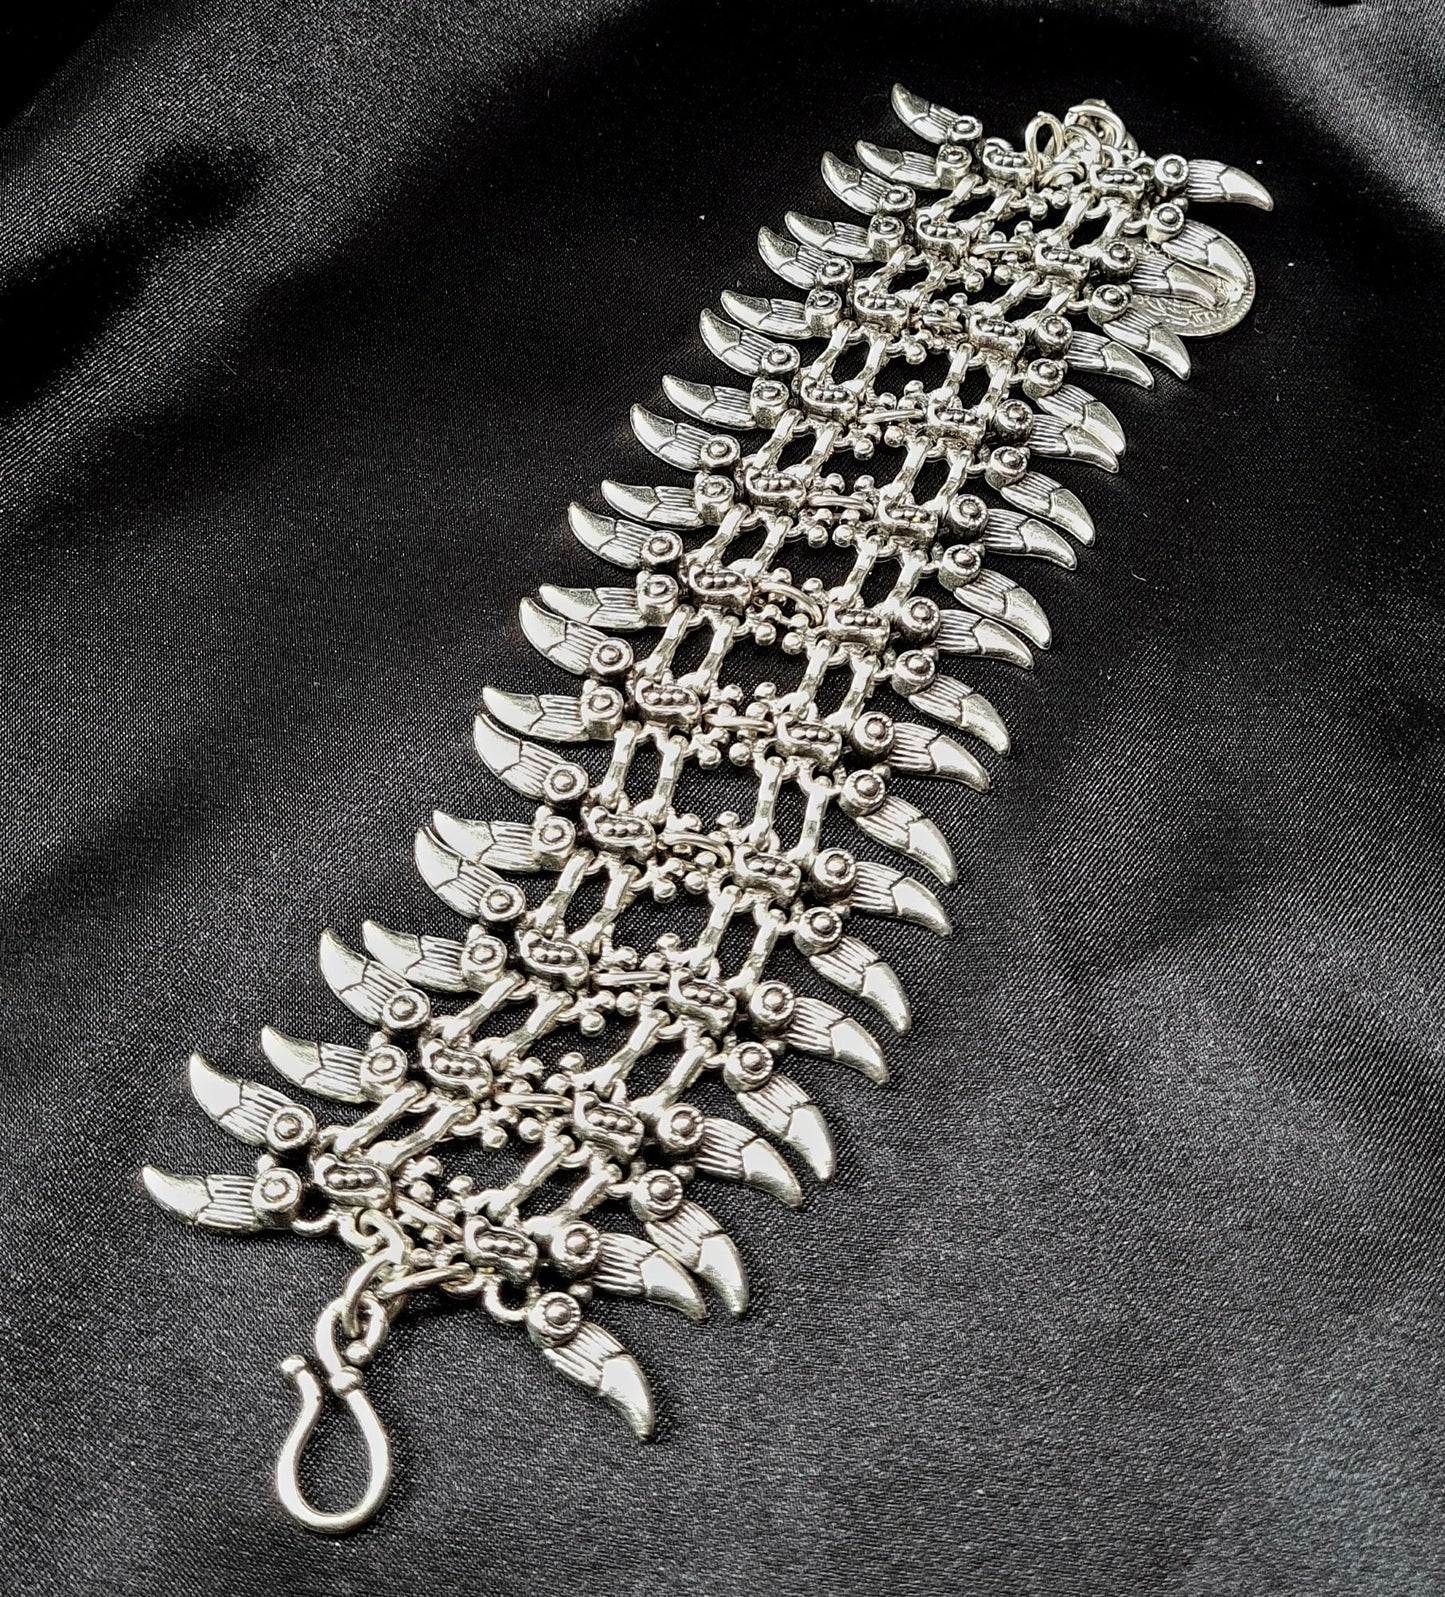 A silver bracelet with a claw design on it. The bracelet is made of silver and has a delicate design. The claw design is in the center of the bracelet and is made up of small, interlocking pieces. The bracelet is sitting on a black cloth